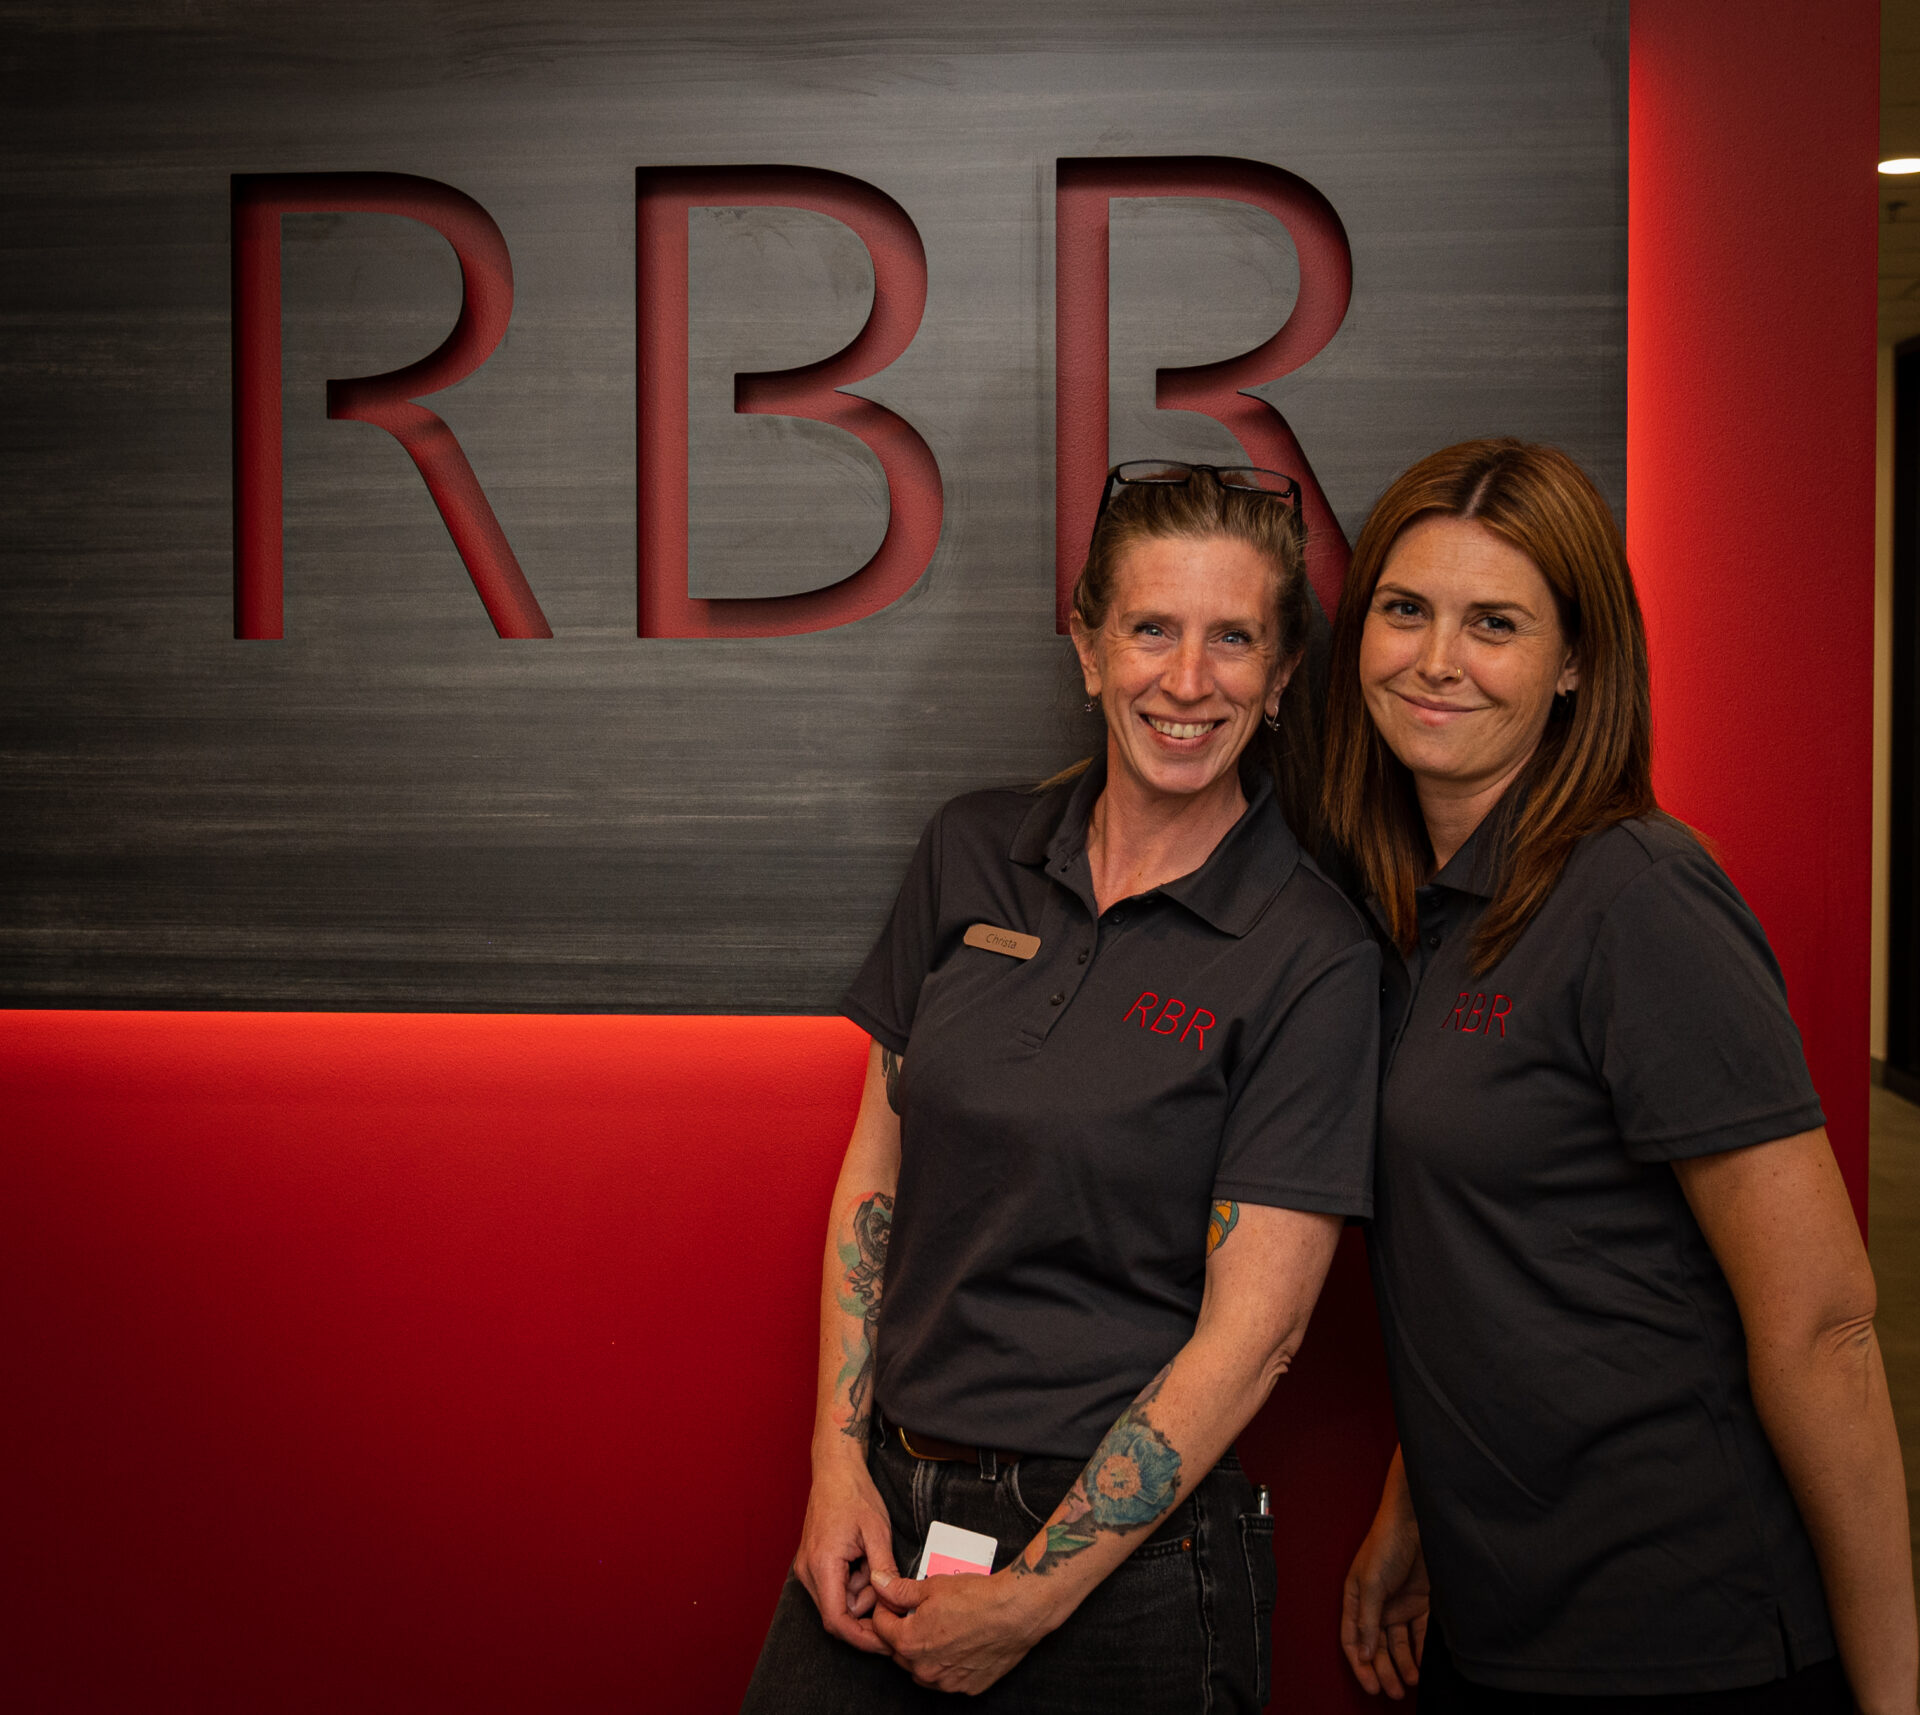 The RBR open house